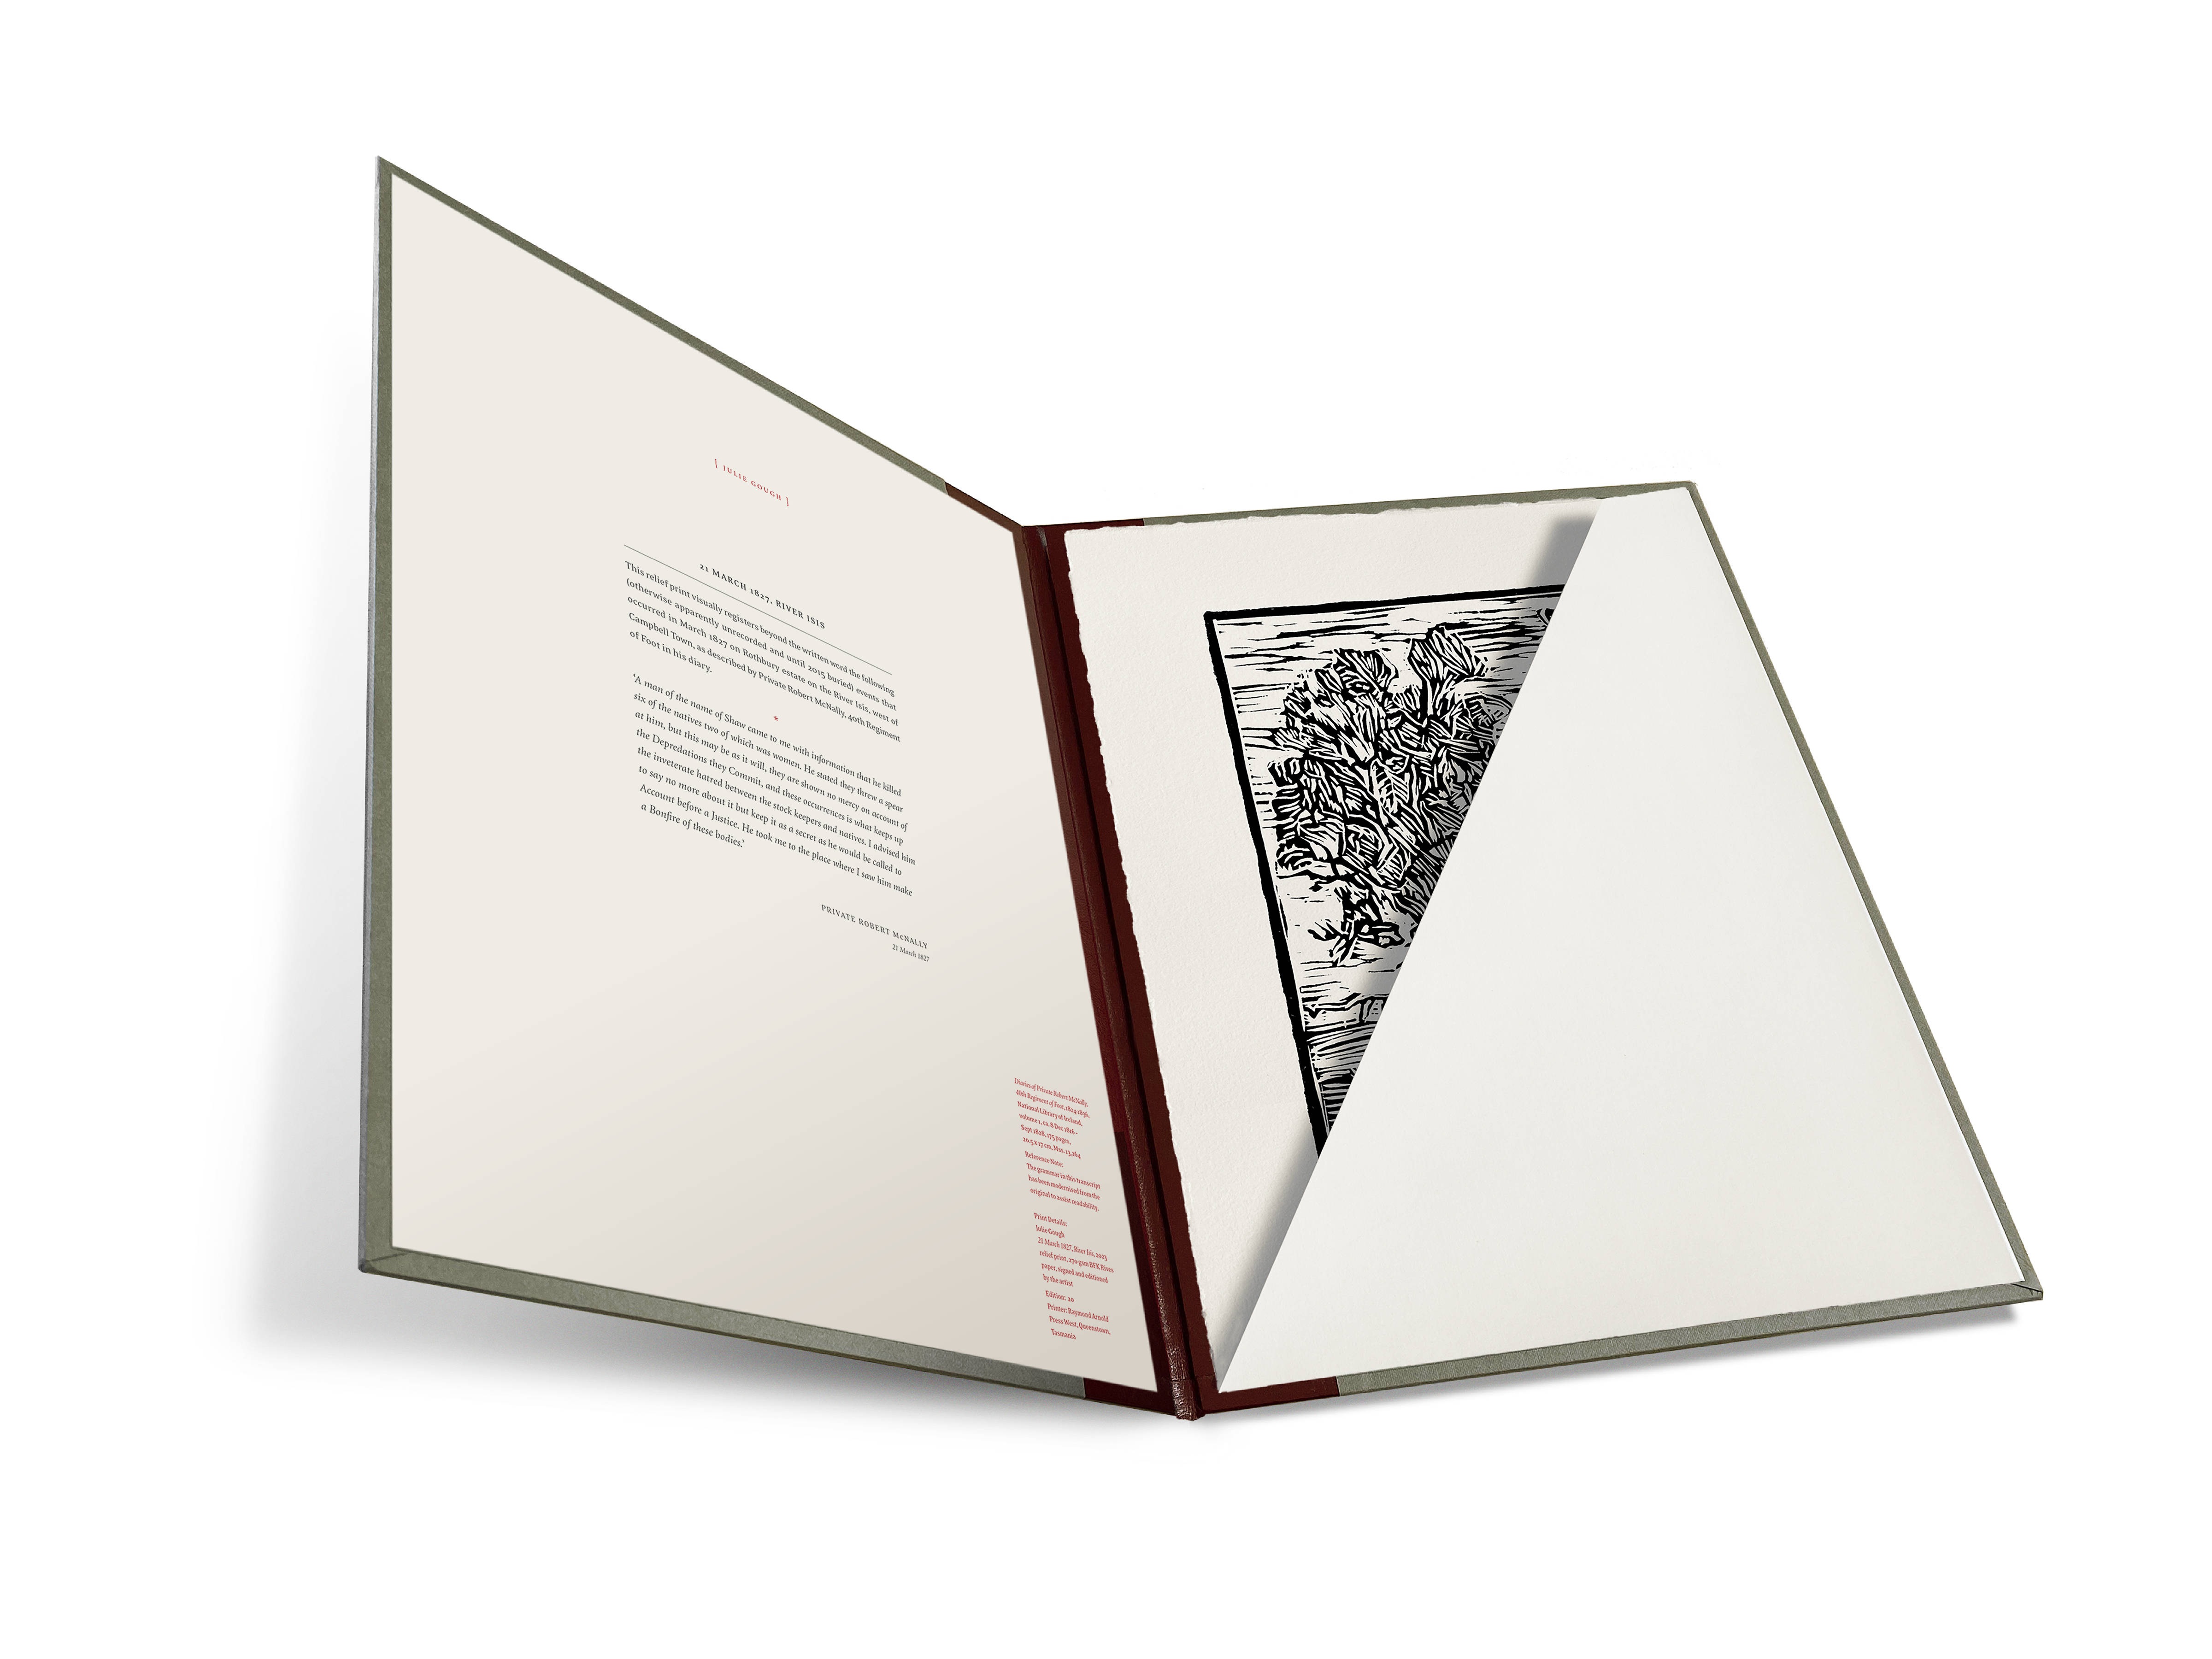 Image of an open version of the Artist Folio with a text panel (at Left) and a print tucked inside a pocket.